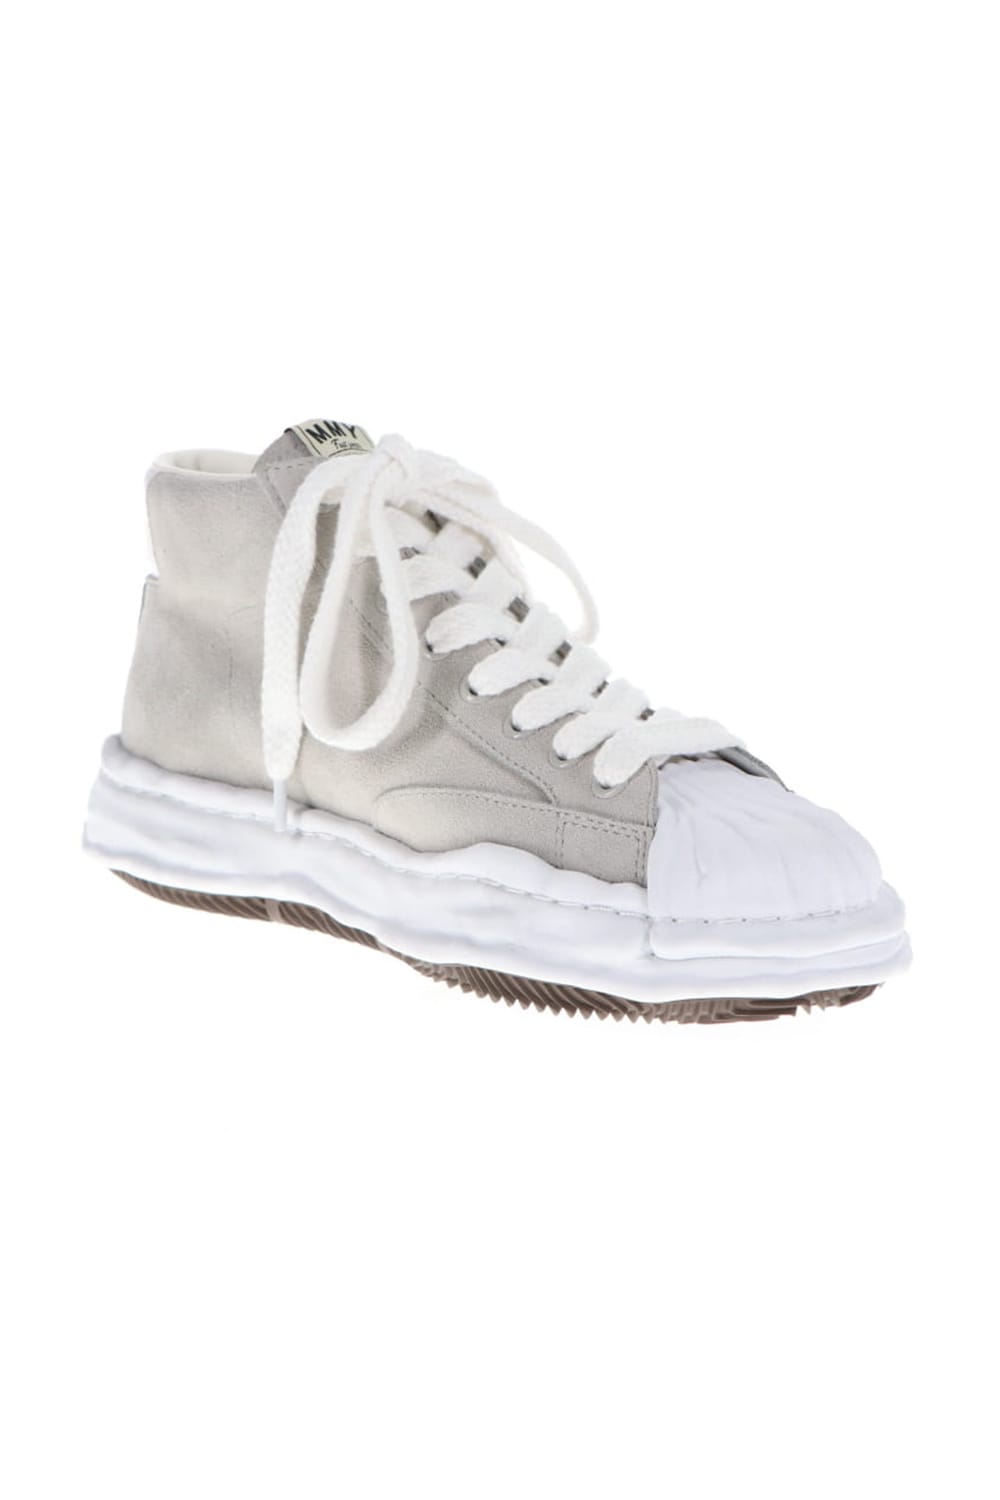 -BLAKEY high- original STC sole suede leather High-Top sneakers White